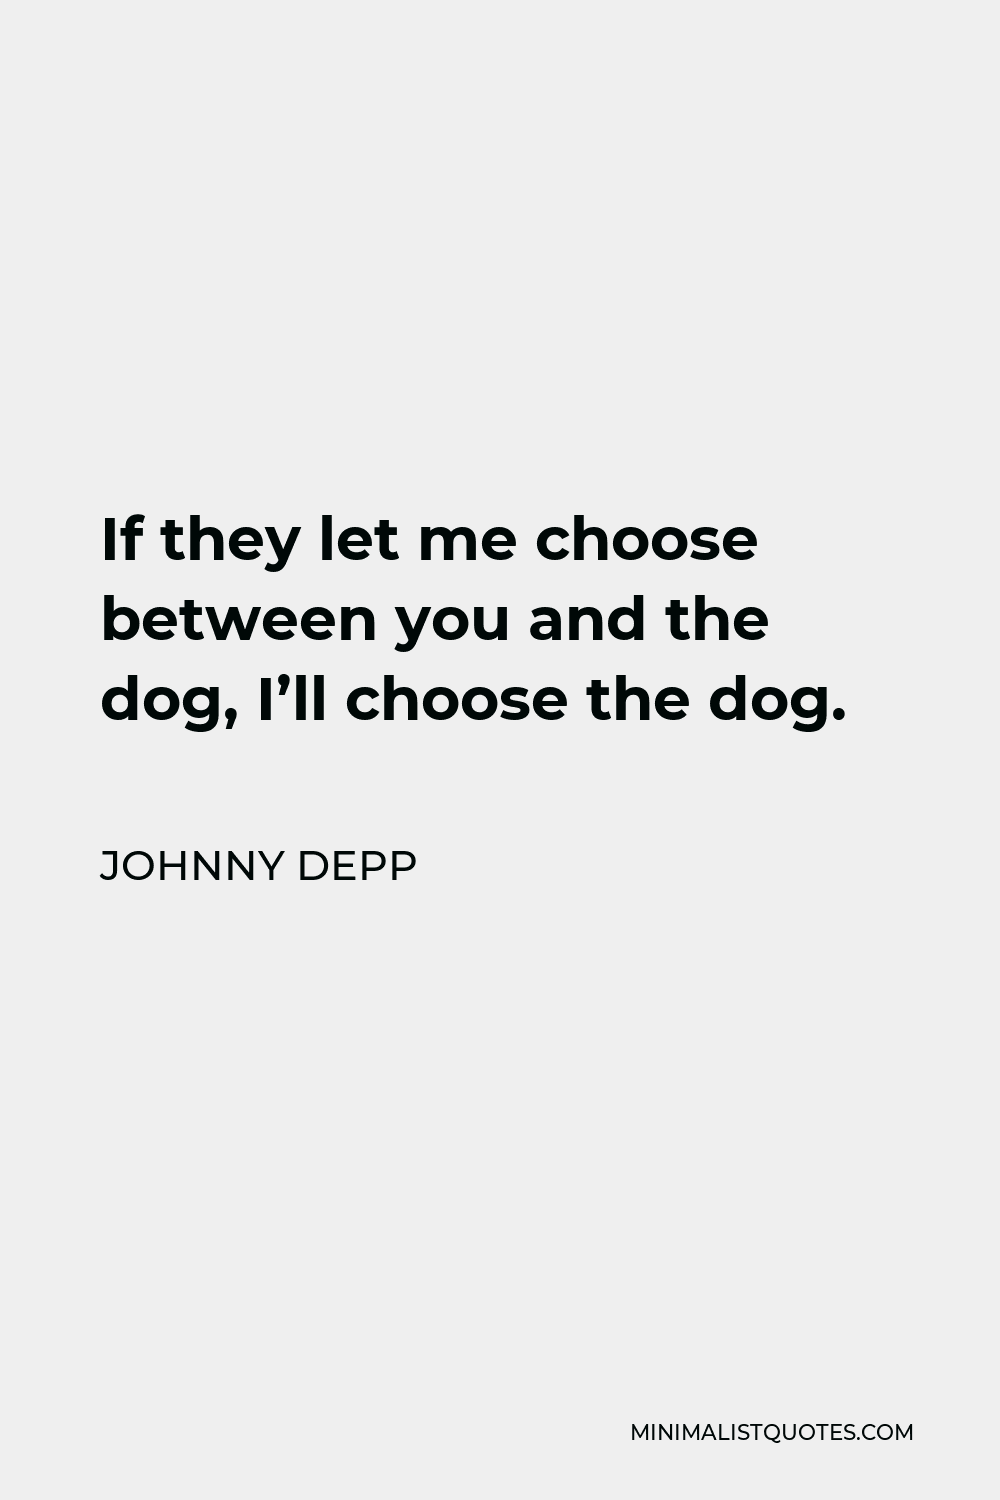 Johnny Depp Quote - If they let me choose between you and the dog, I’ll choose the dog.